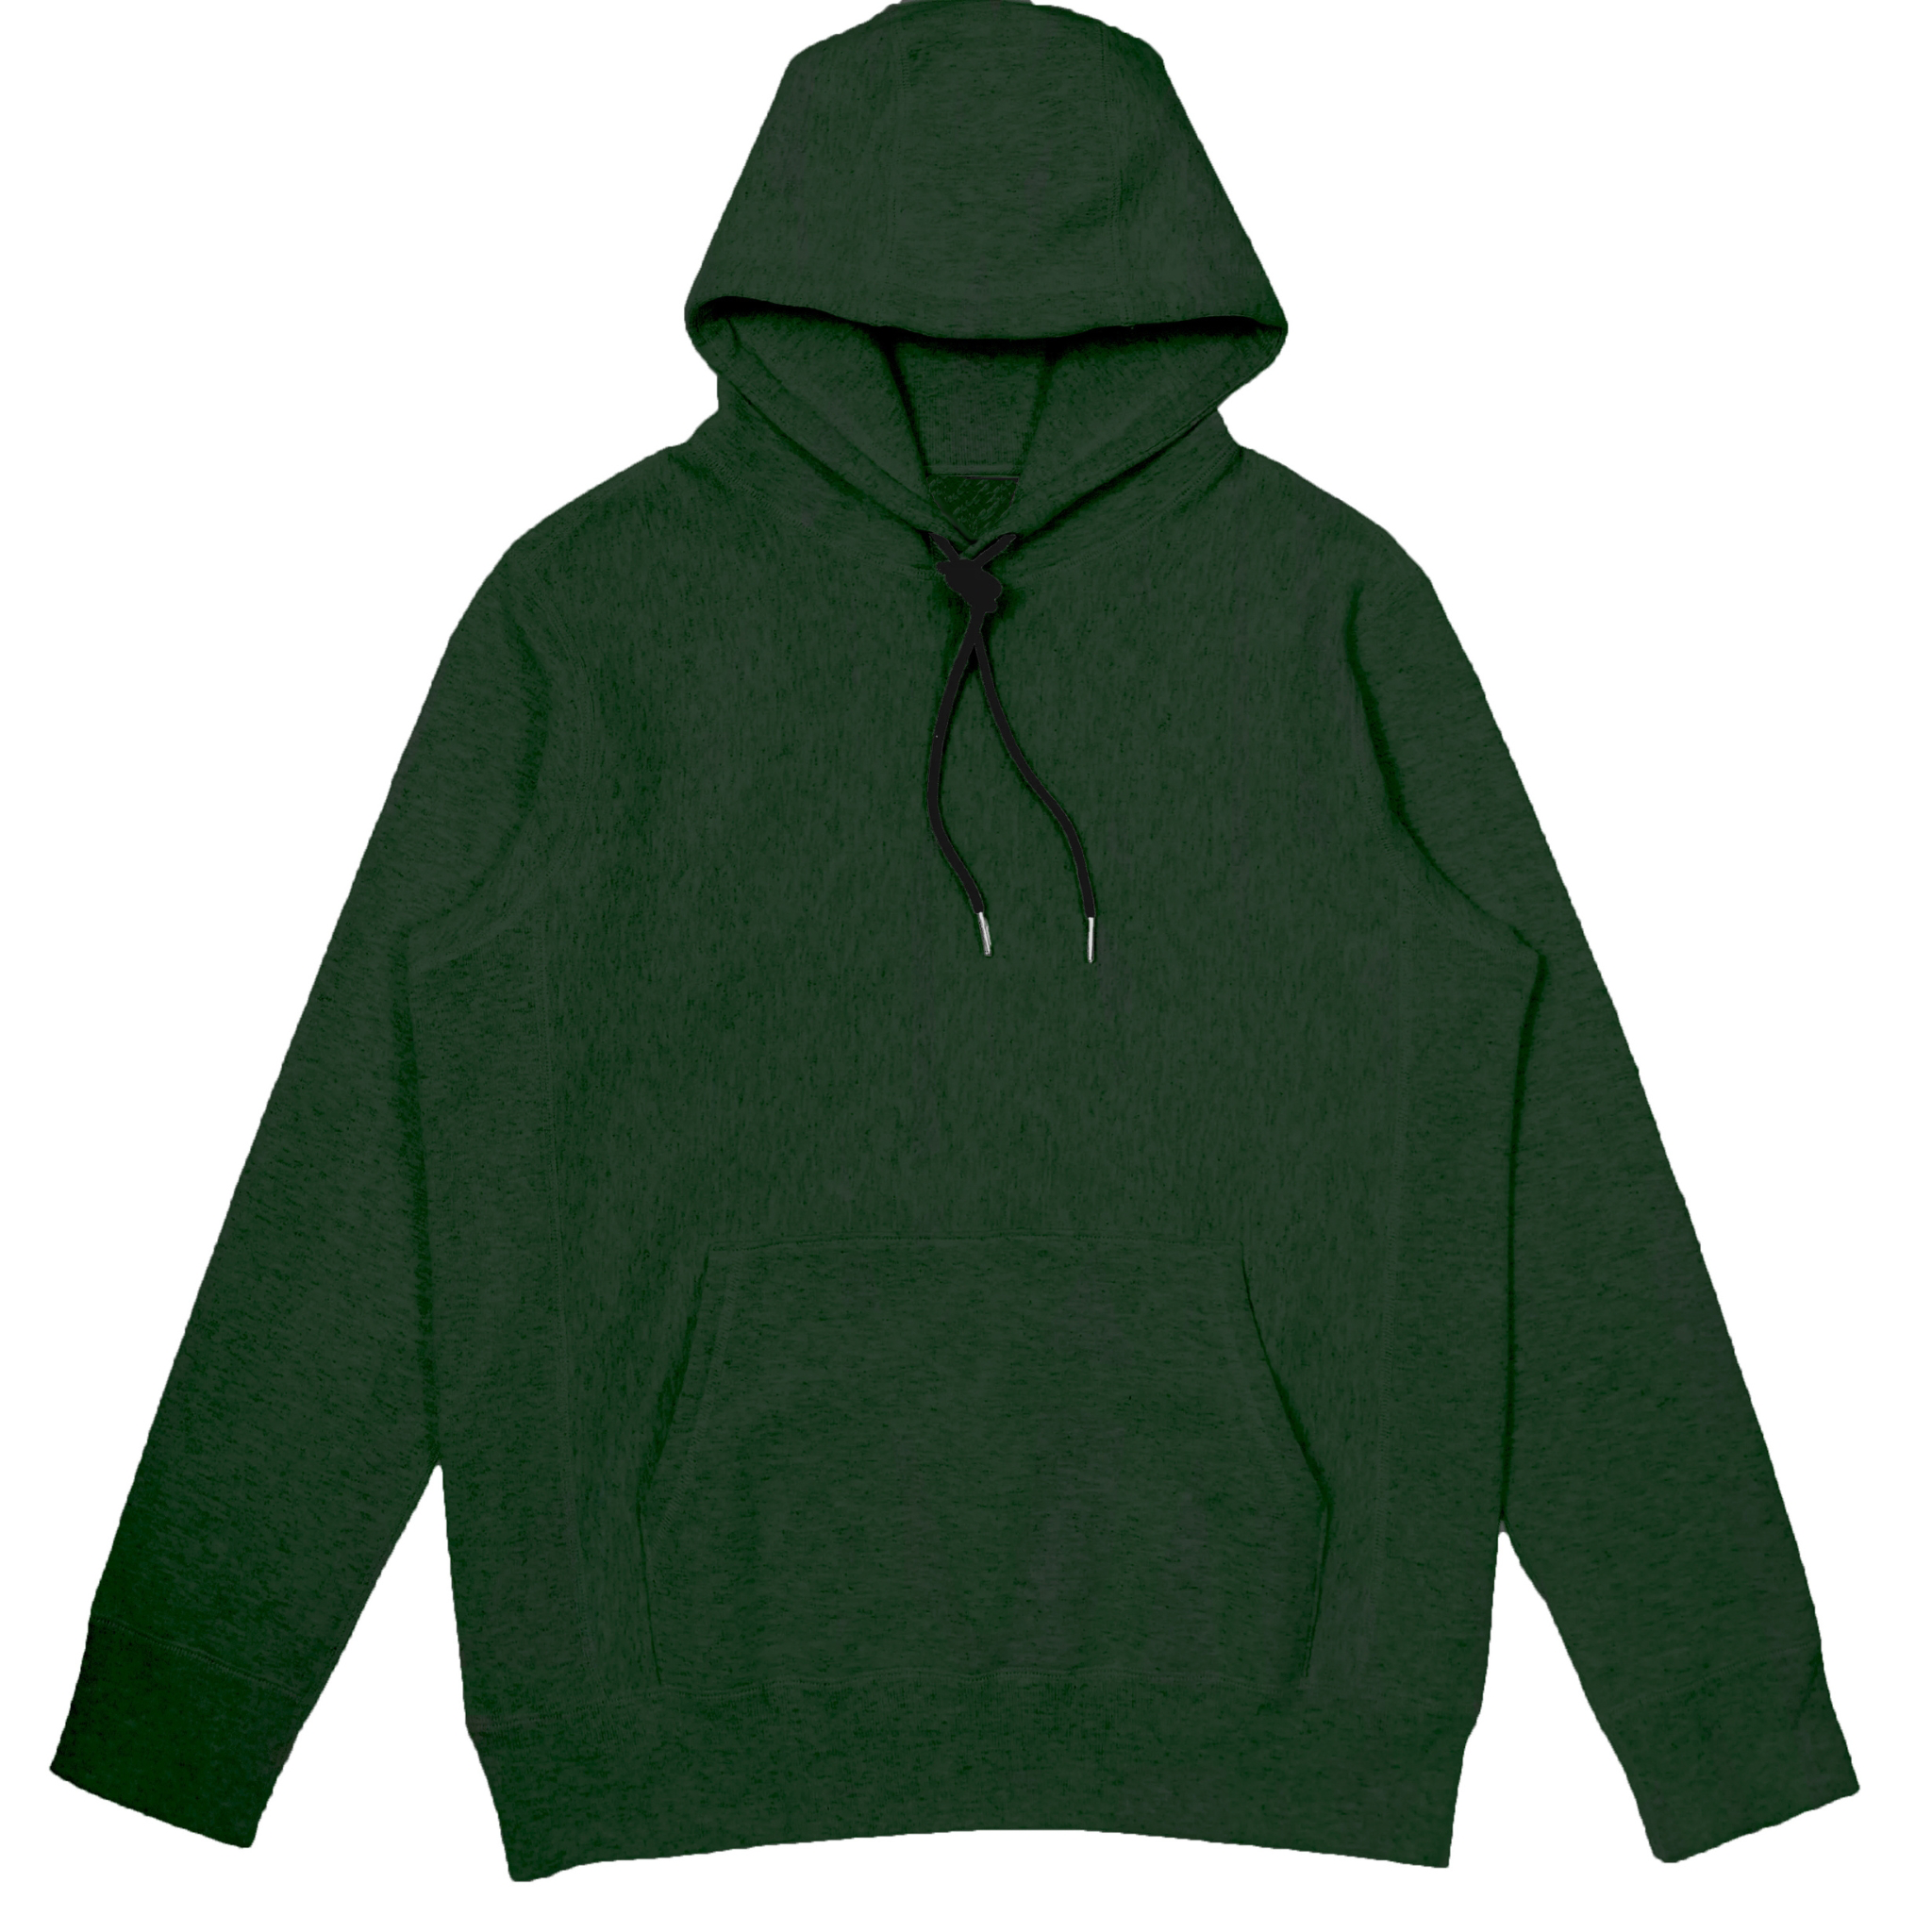 Heavyweight hoodie in green cotton facing the camera on a white background.